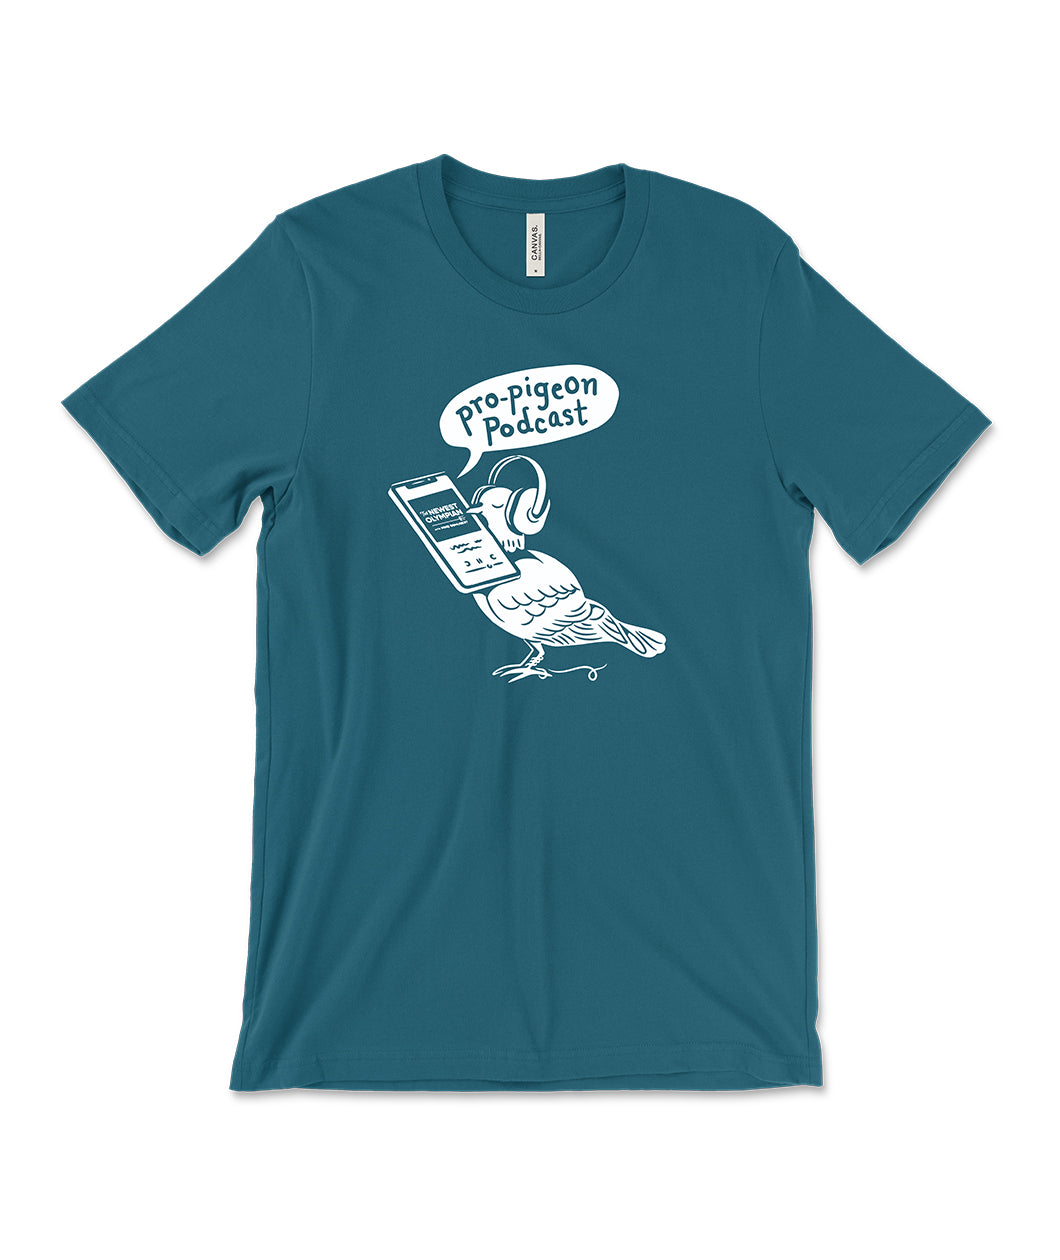 A dark teal t-shirt with a white, illustrated pigeon holding a phone in its mouth, waring headphones with a speech bubble that says "pro-pigeon podcast". From the Newest Olympian.